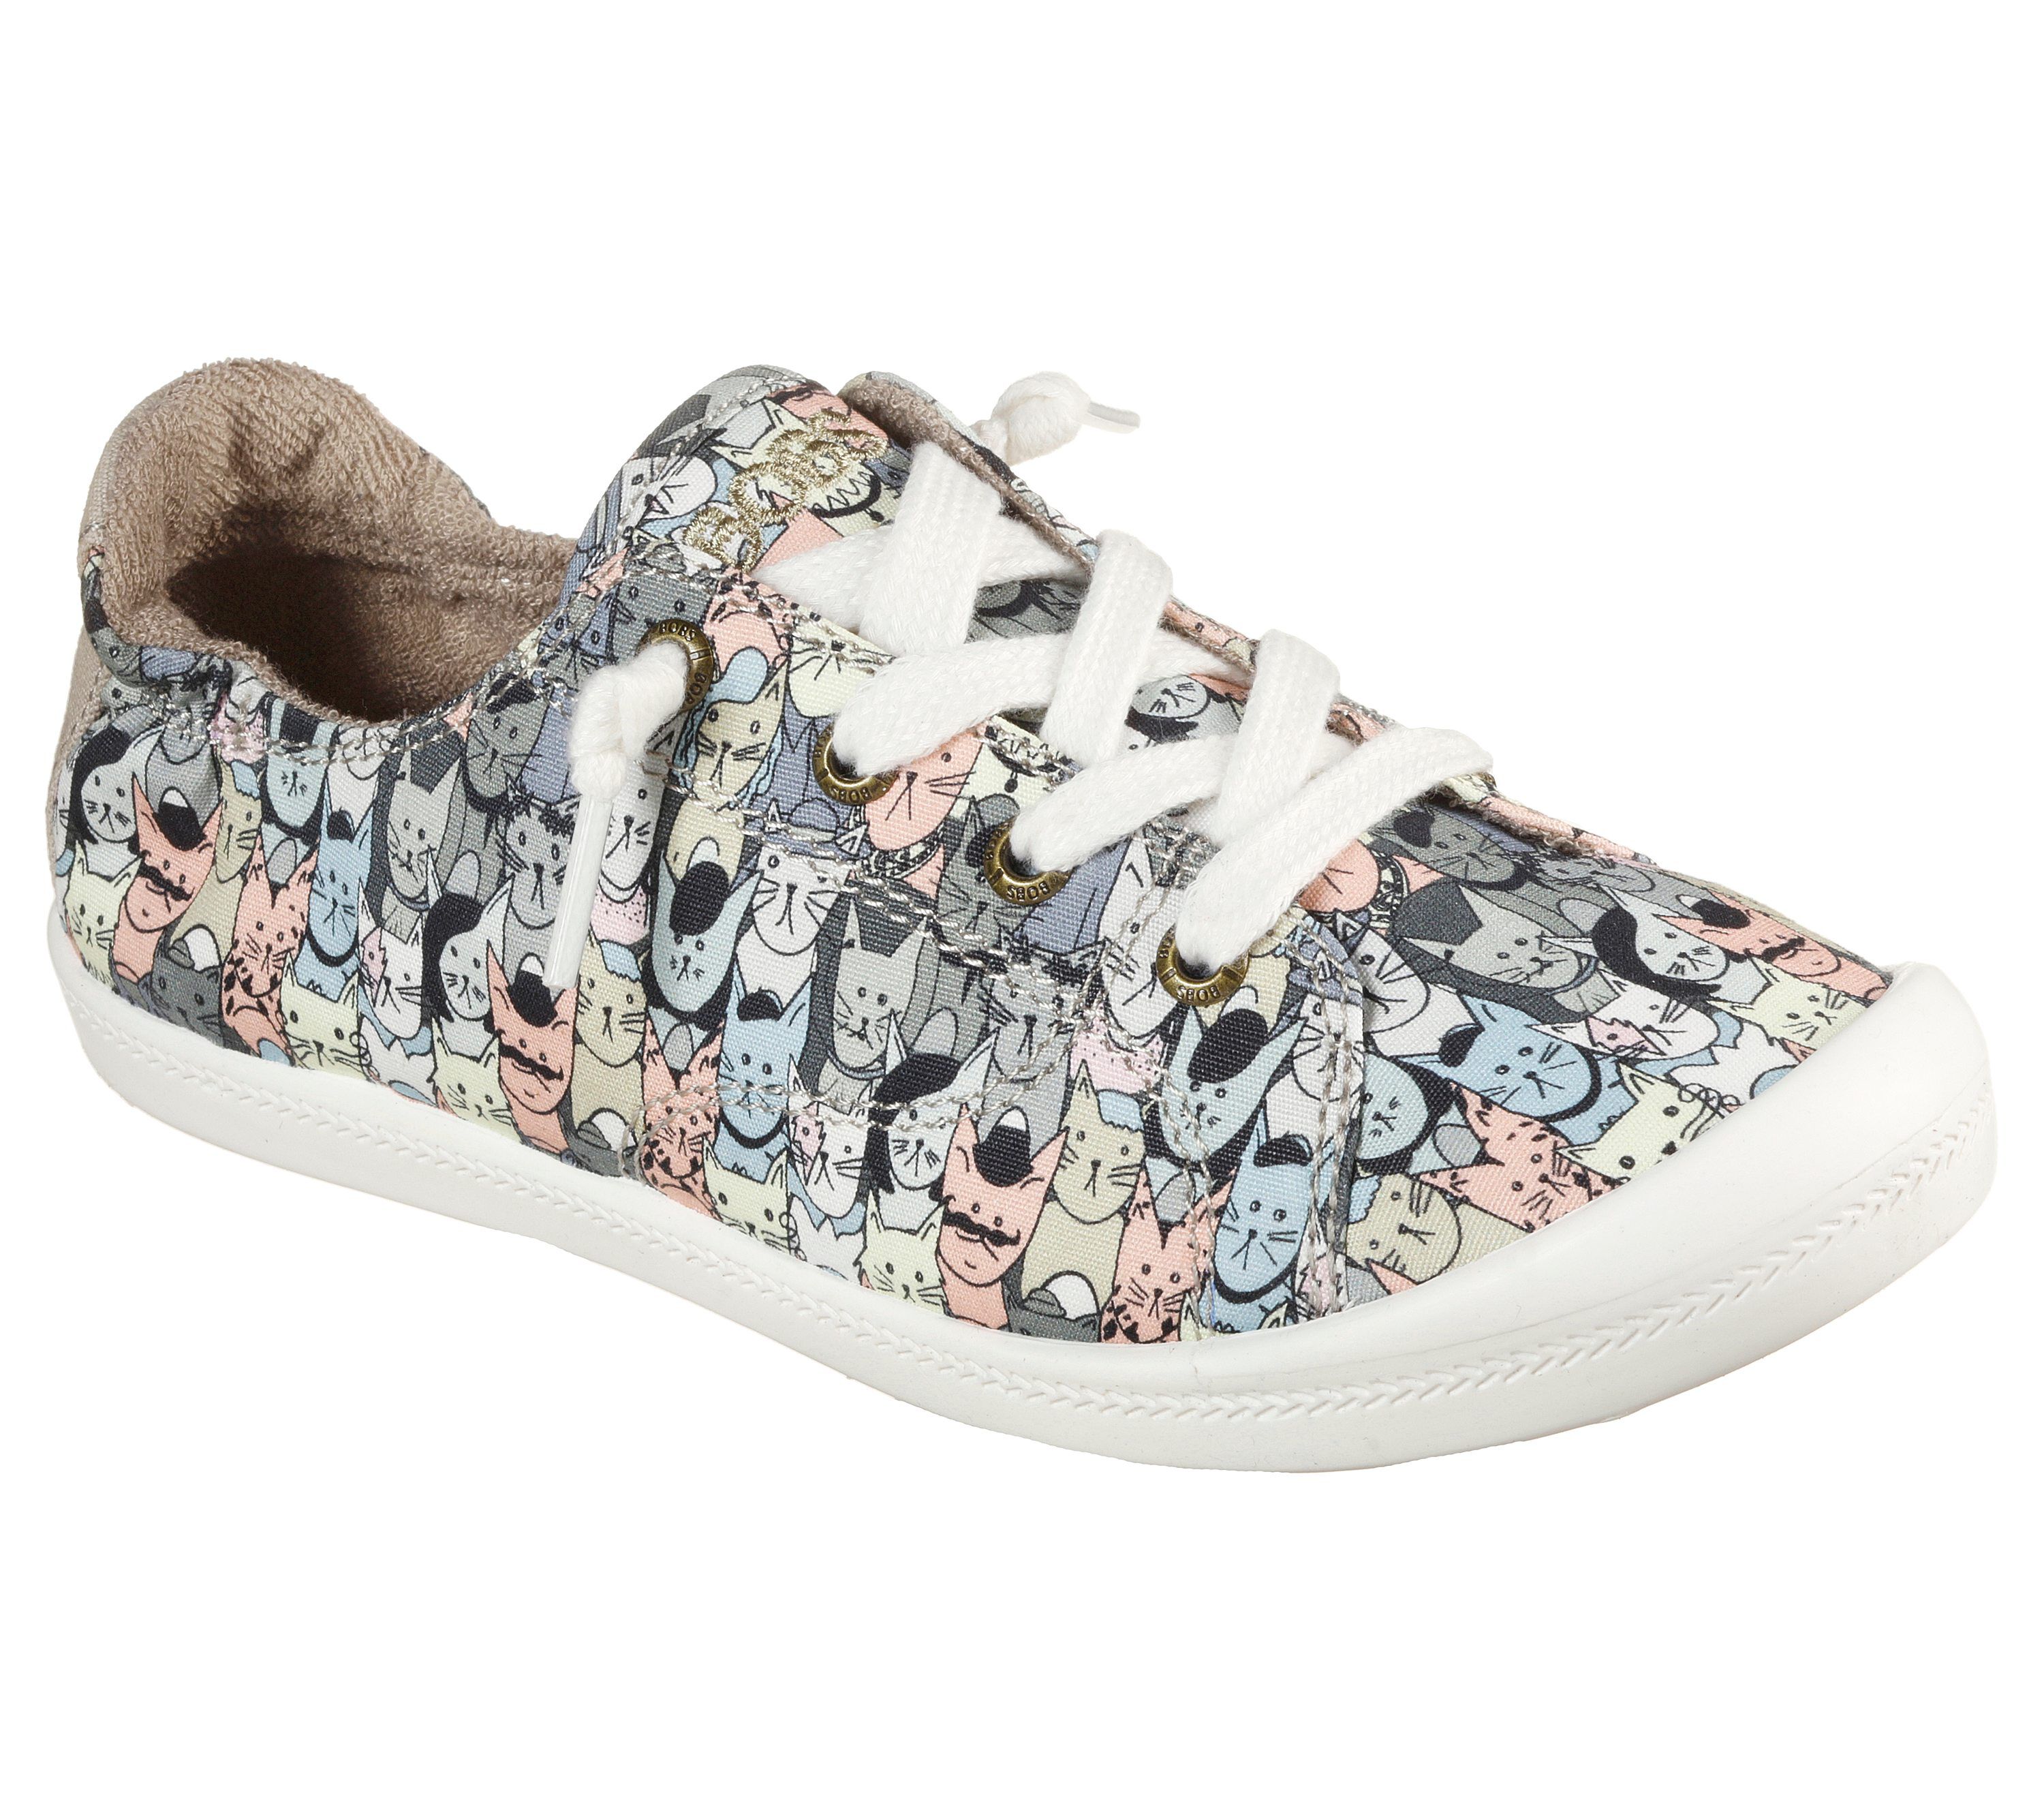 bobs shoes with dogs on them